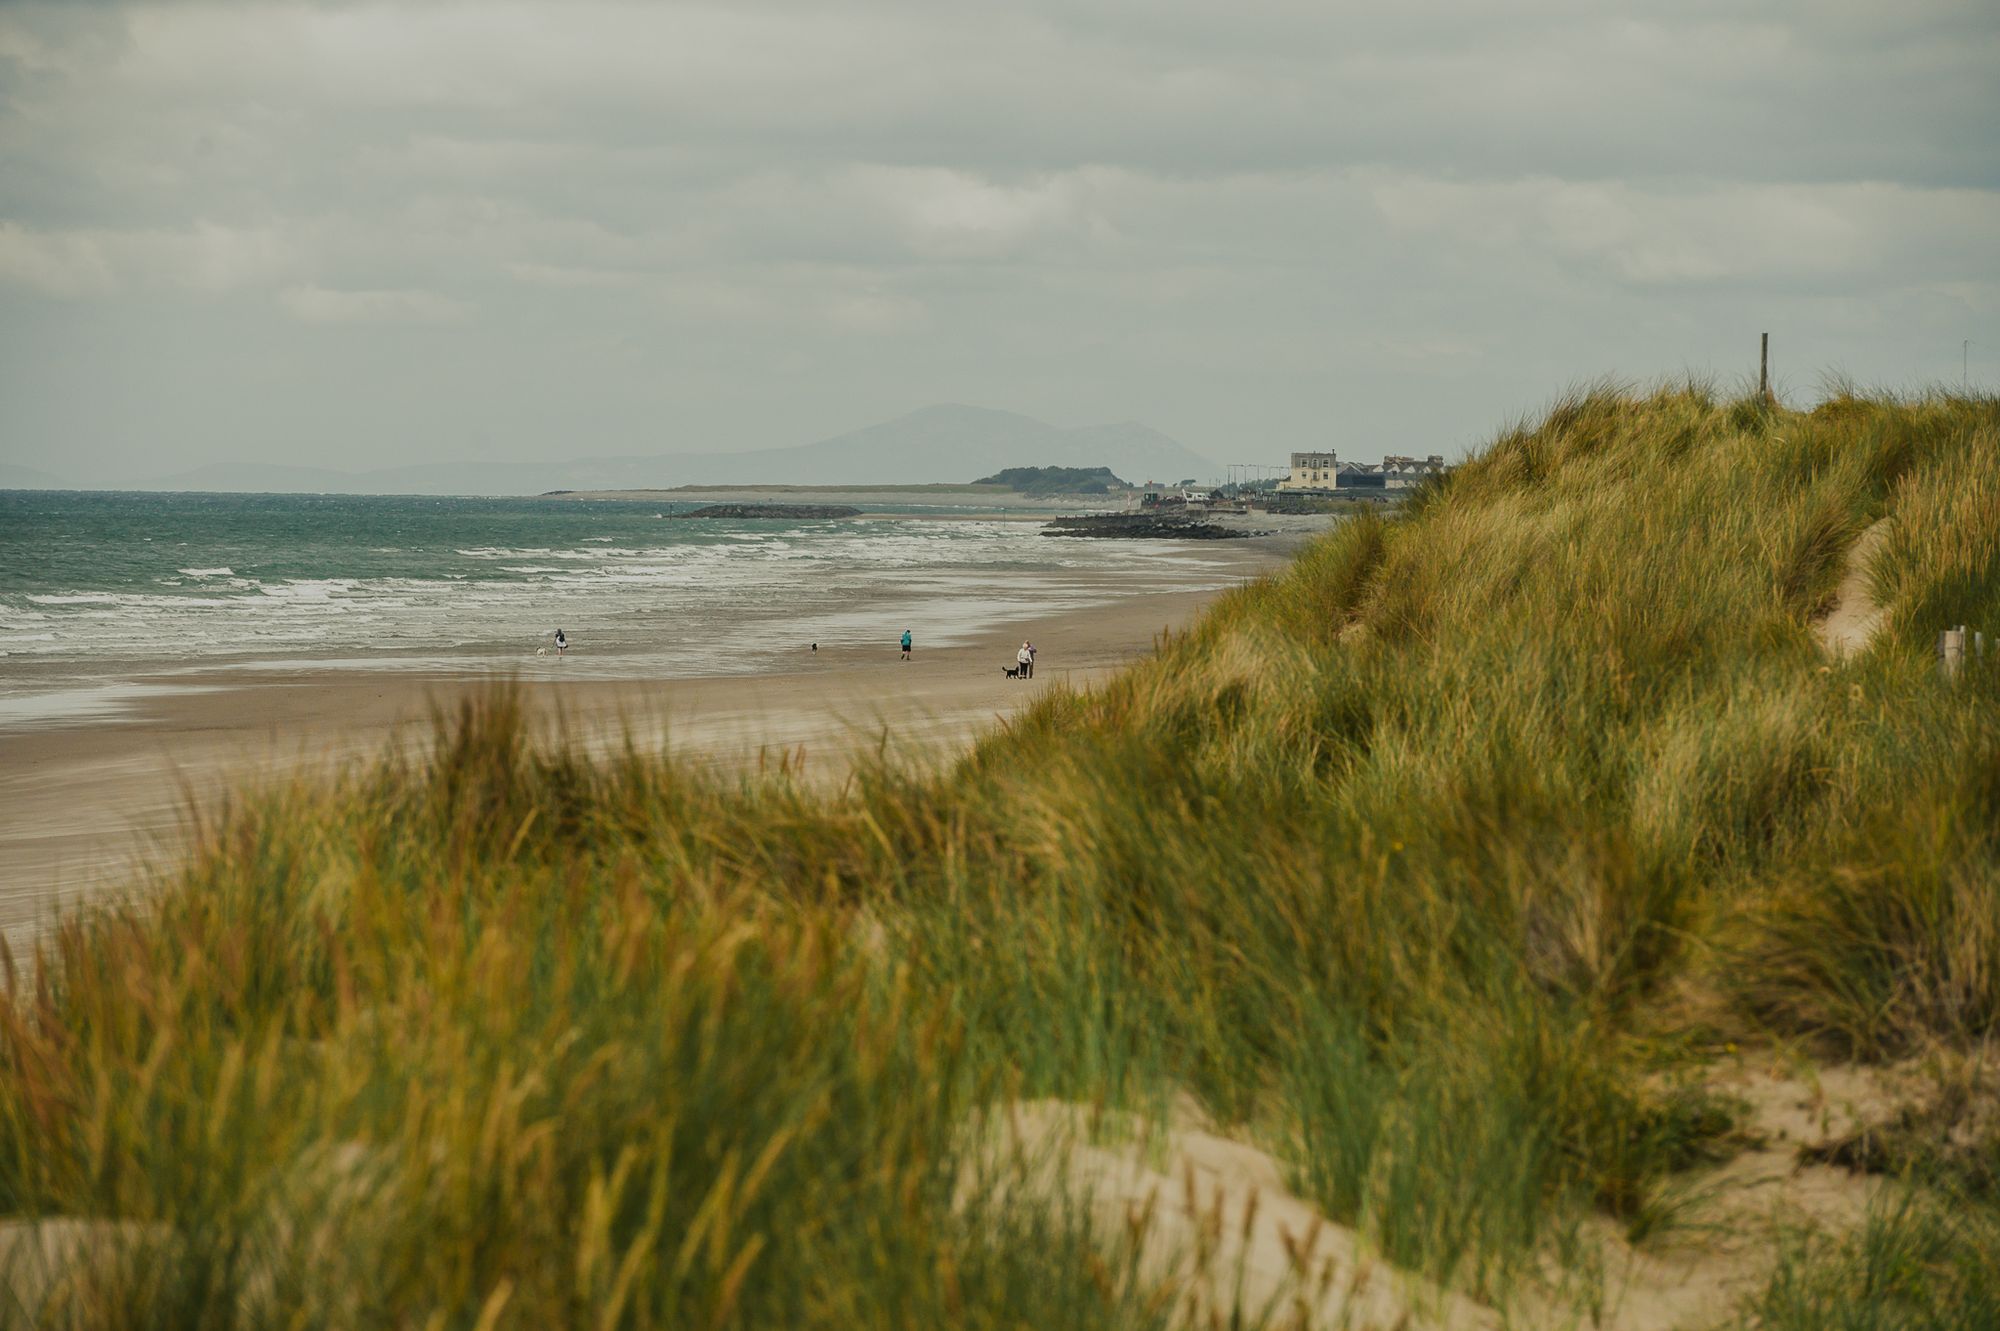 Looking through sand dunes across a beach as the tide goes out. There is a feint hint of a mountain on the horizon.